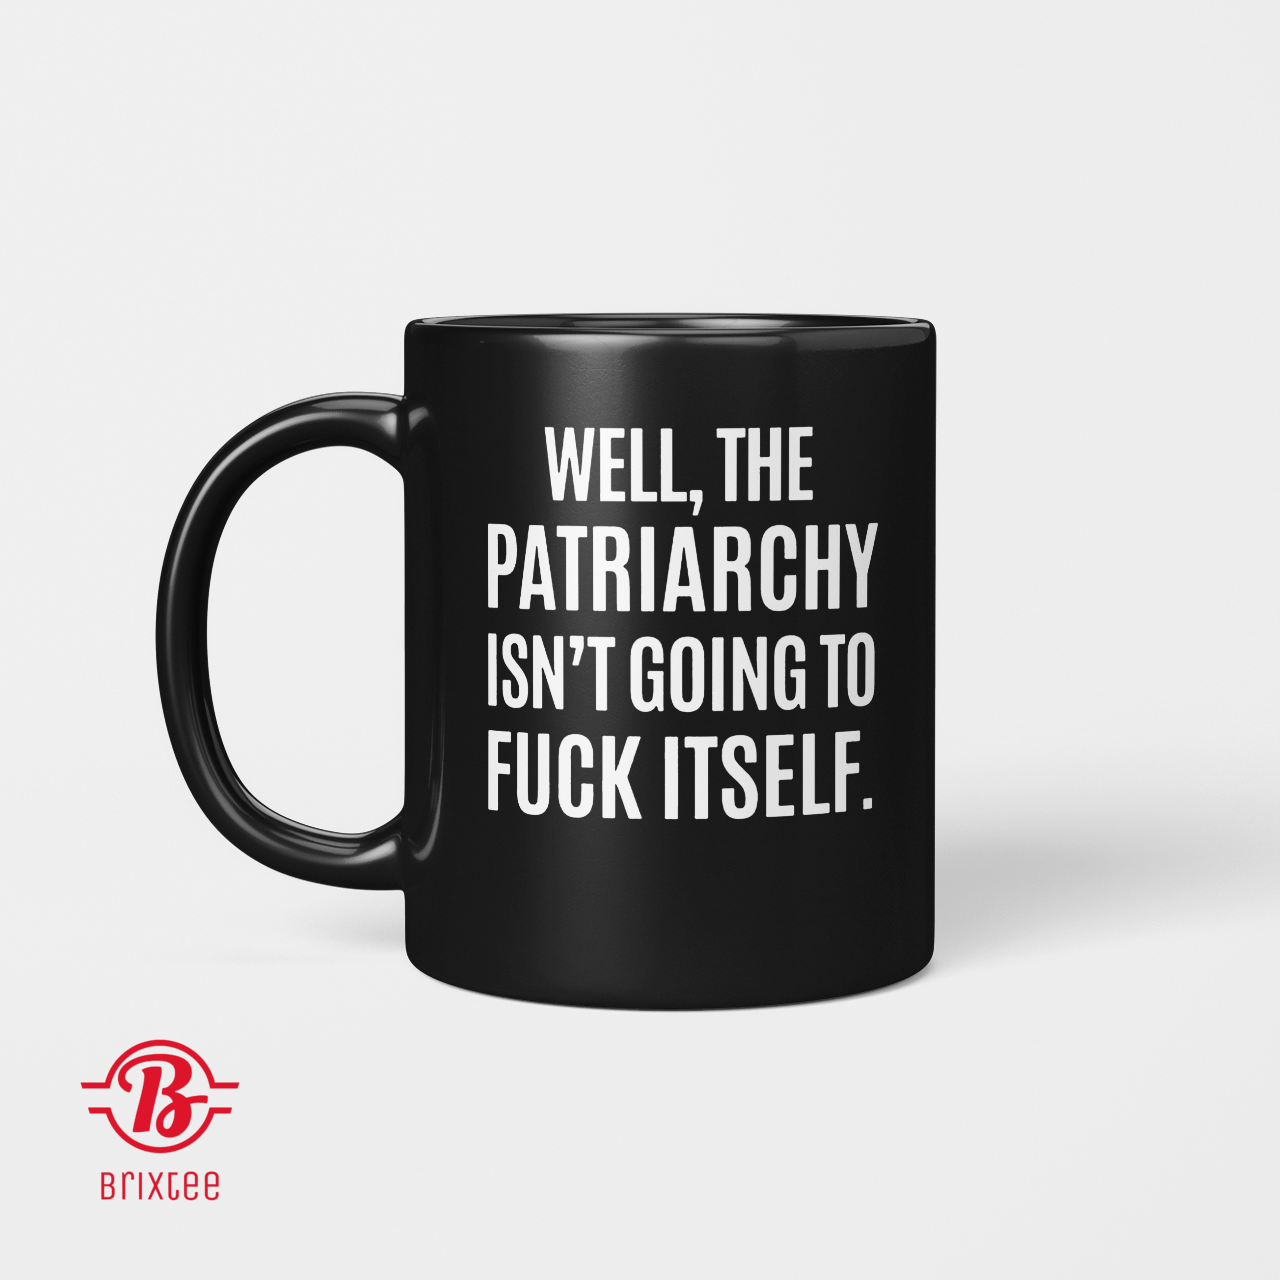 Well, The Patriarchy Isn't Going To Fuck Itself